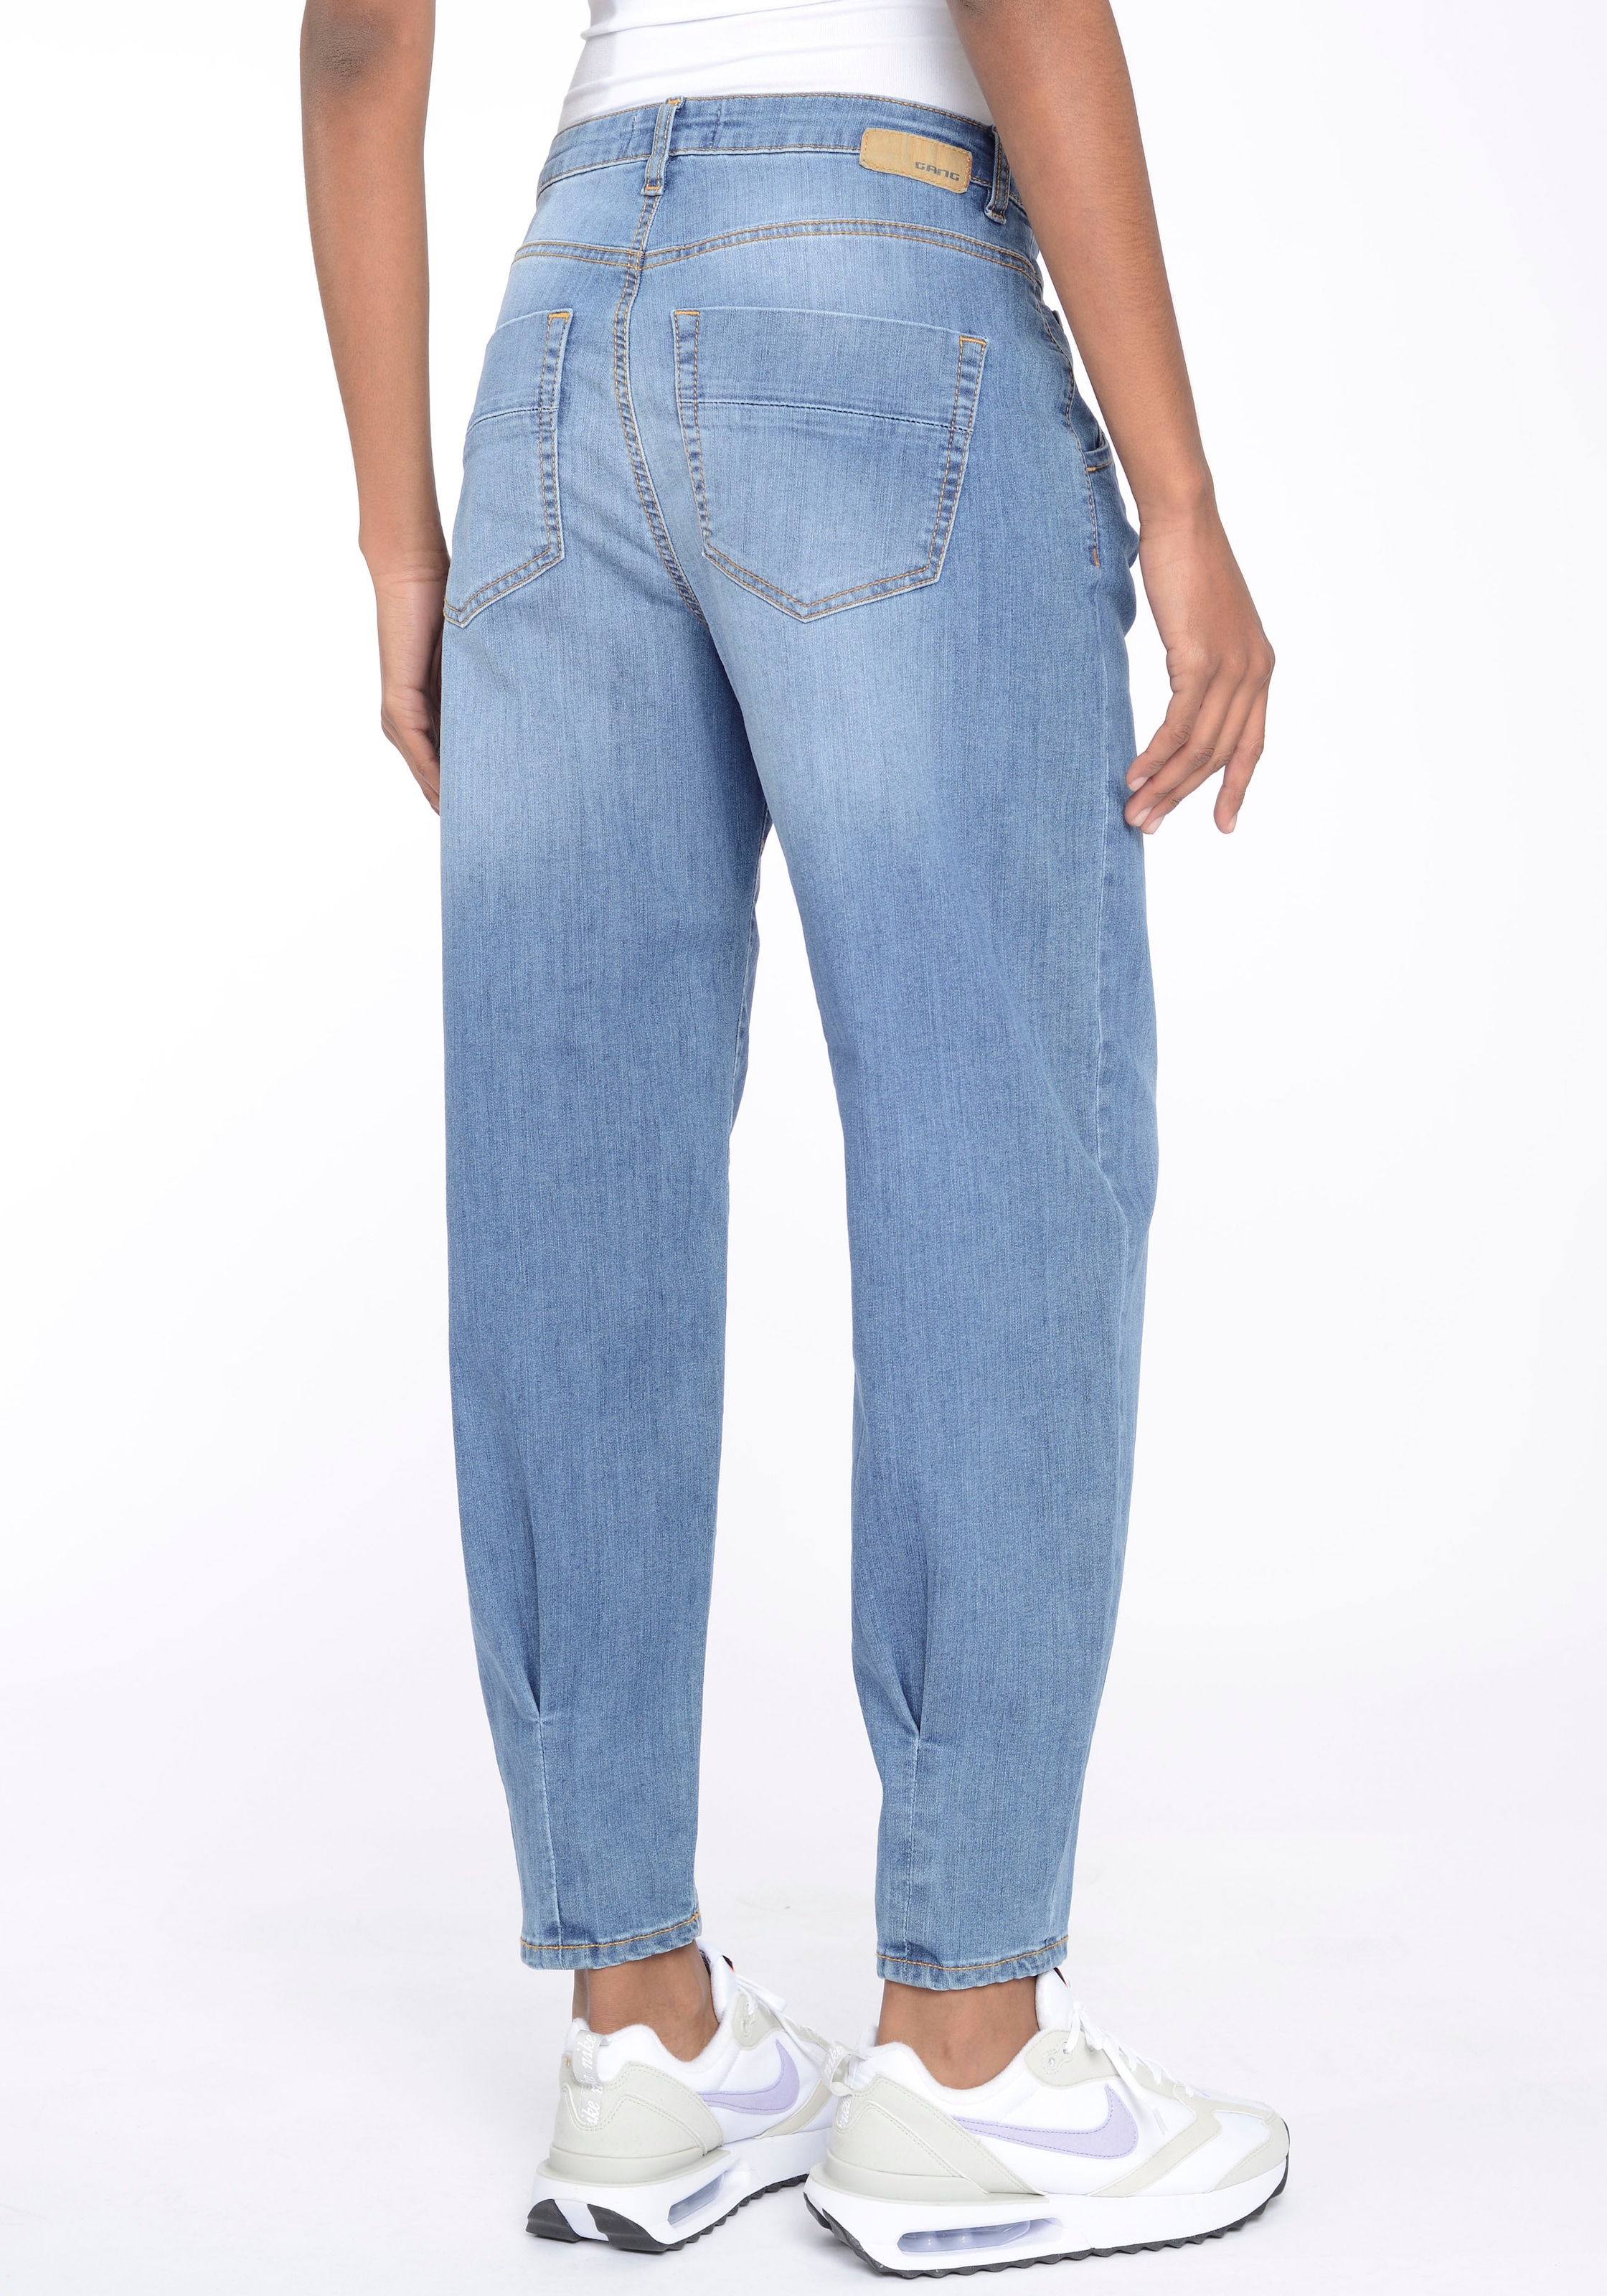 bestellen Ballon Bequeme Online OTTO Fit cooler Shop GANG Jeans in im Used »94SILVIA«, Waschung